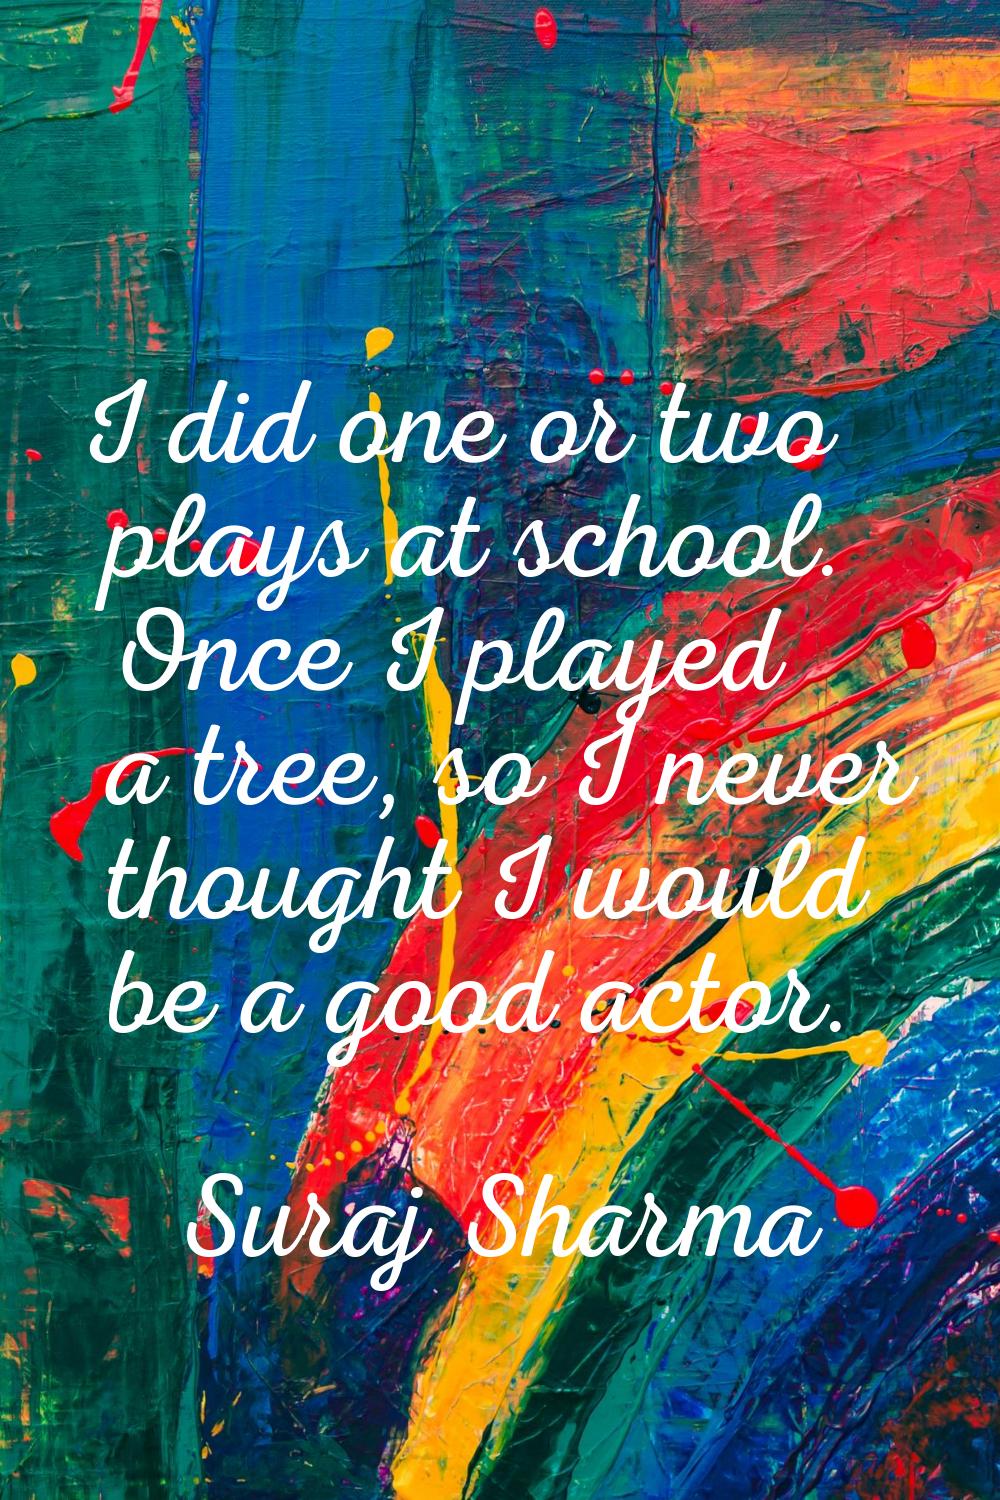 I did one or two plays at school. Once I played a tree, so I never thought I would be a good actor.